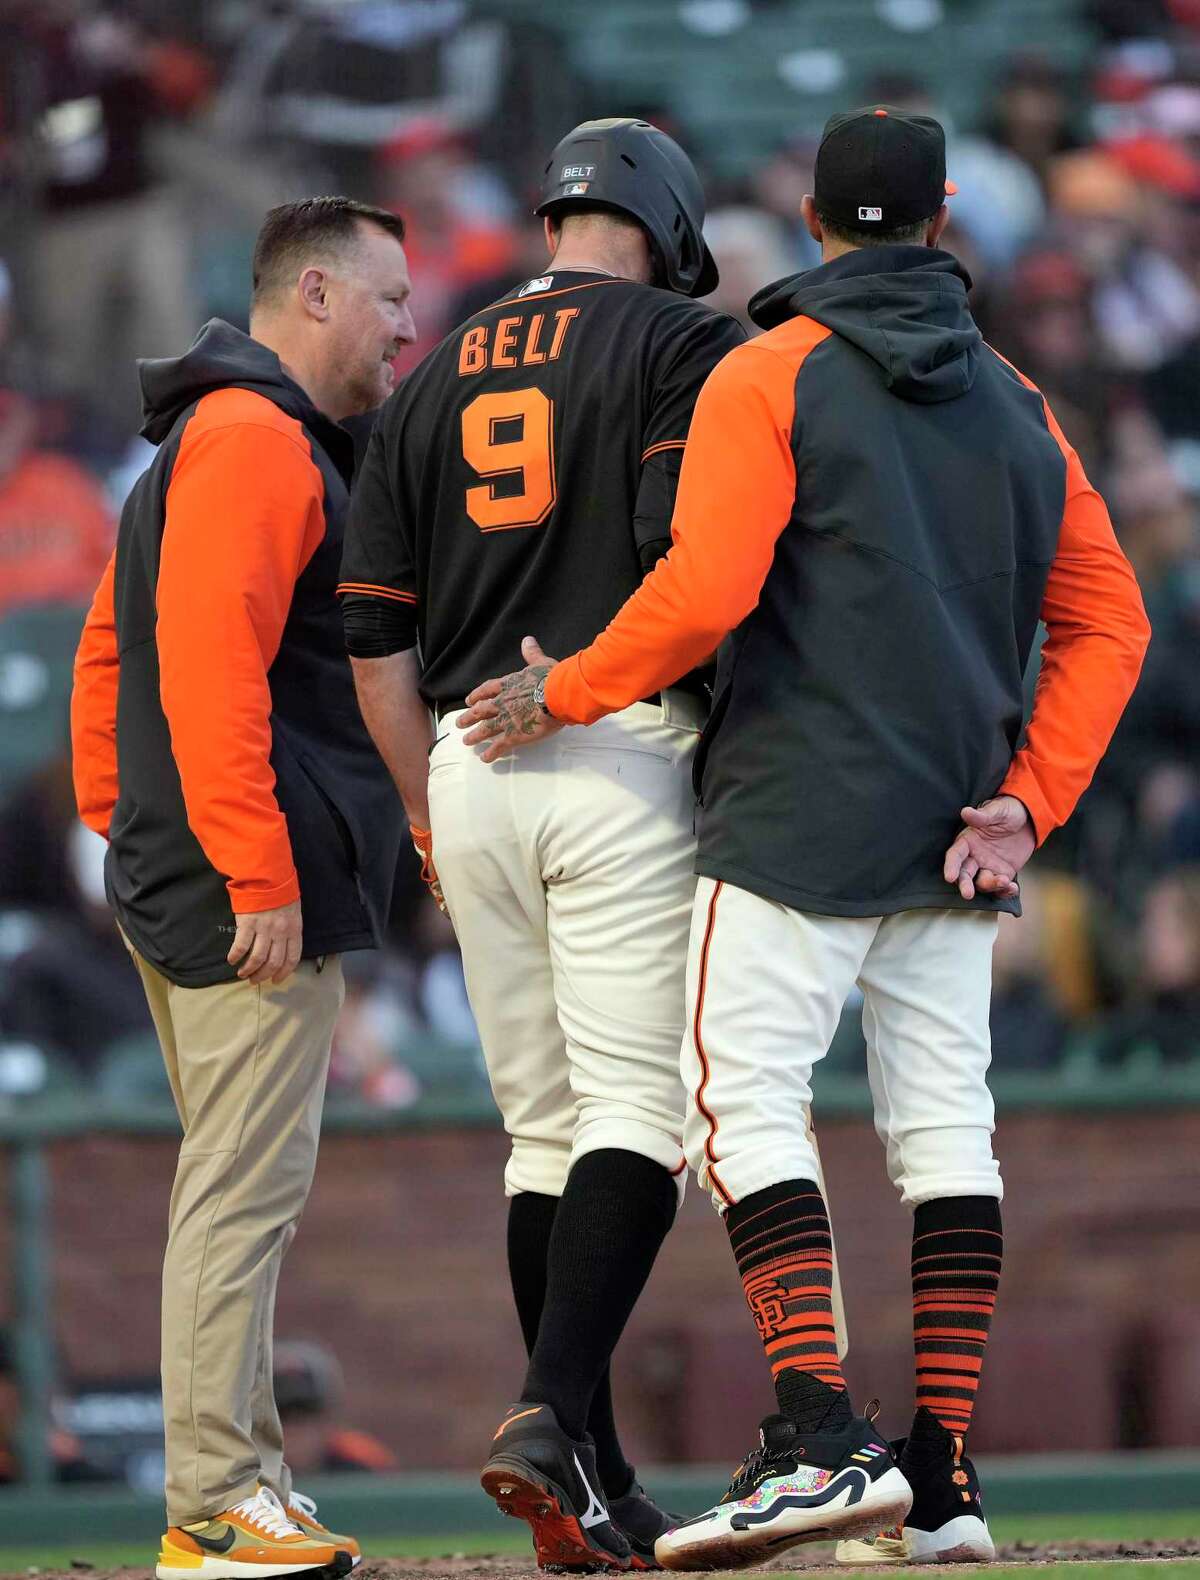 San Francisco Giants' Brandon Belt (9) leaves the baseball game with a team trainer and manager Gabe Kapler, right, during the eighth inning against the St. Louis Cardinals on Saturday, May 7, 2022, in San Francisco. (AP Photo/Tony Avelar)